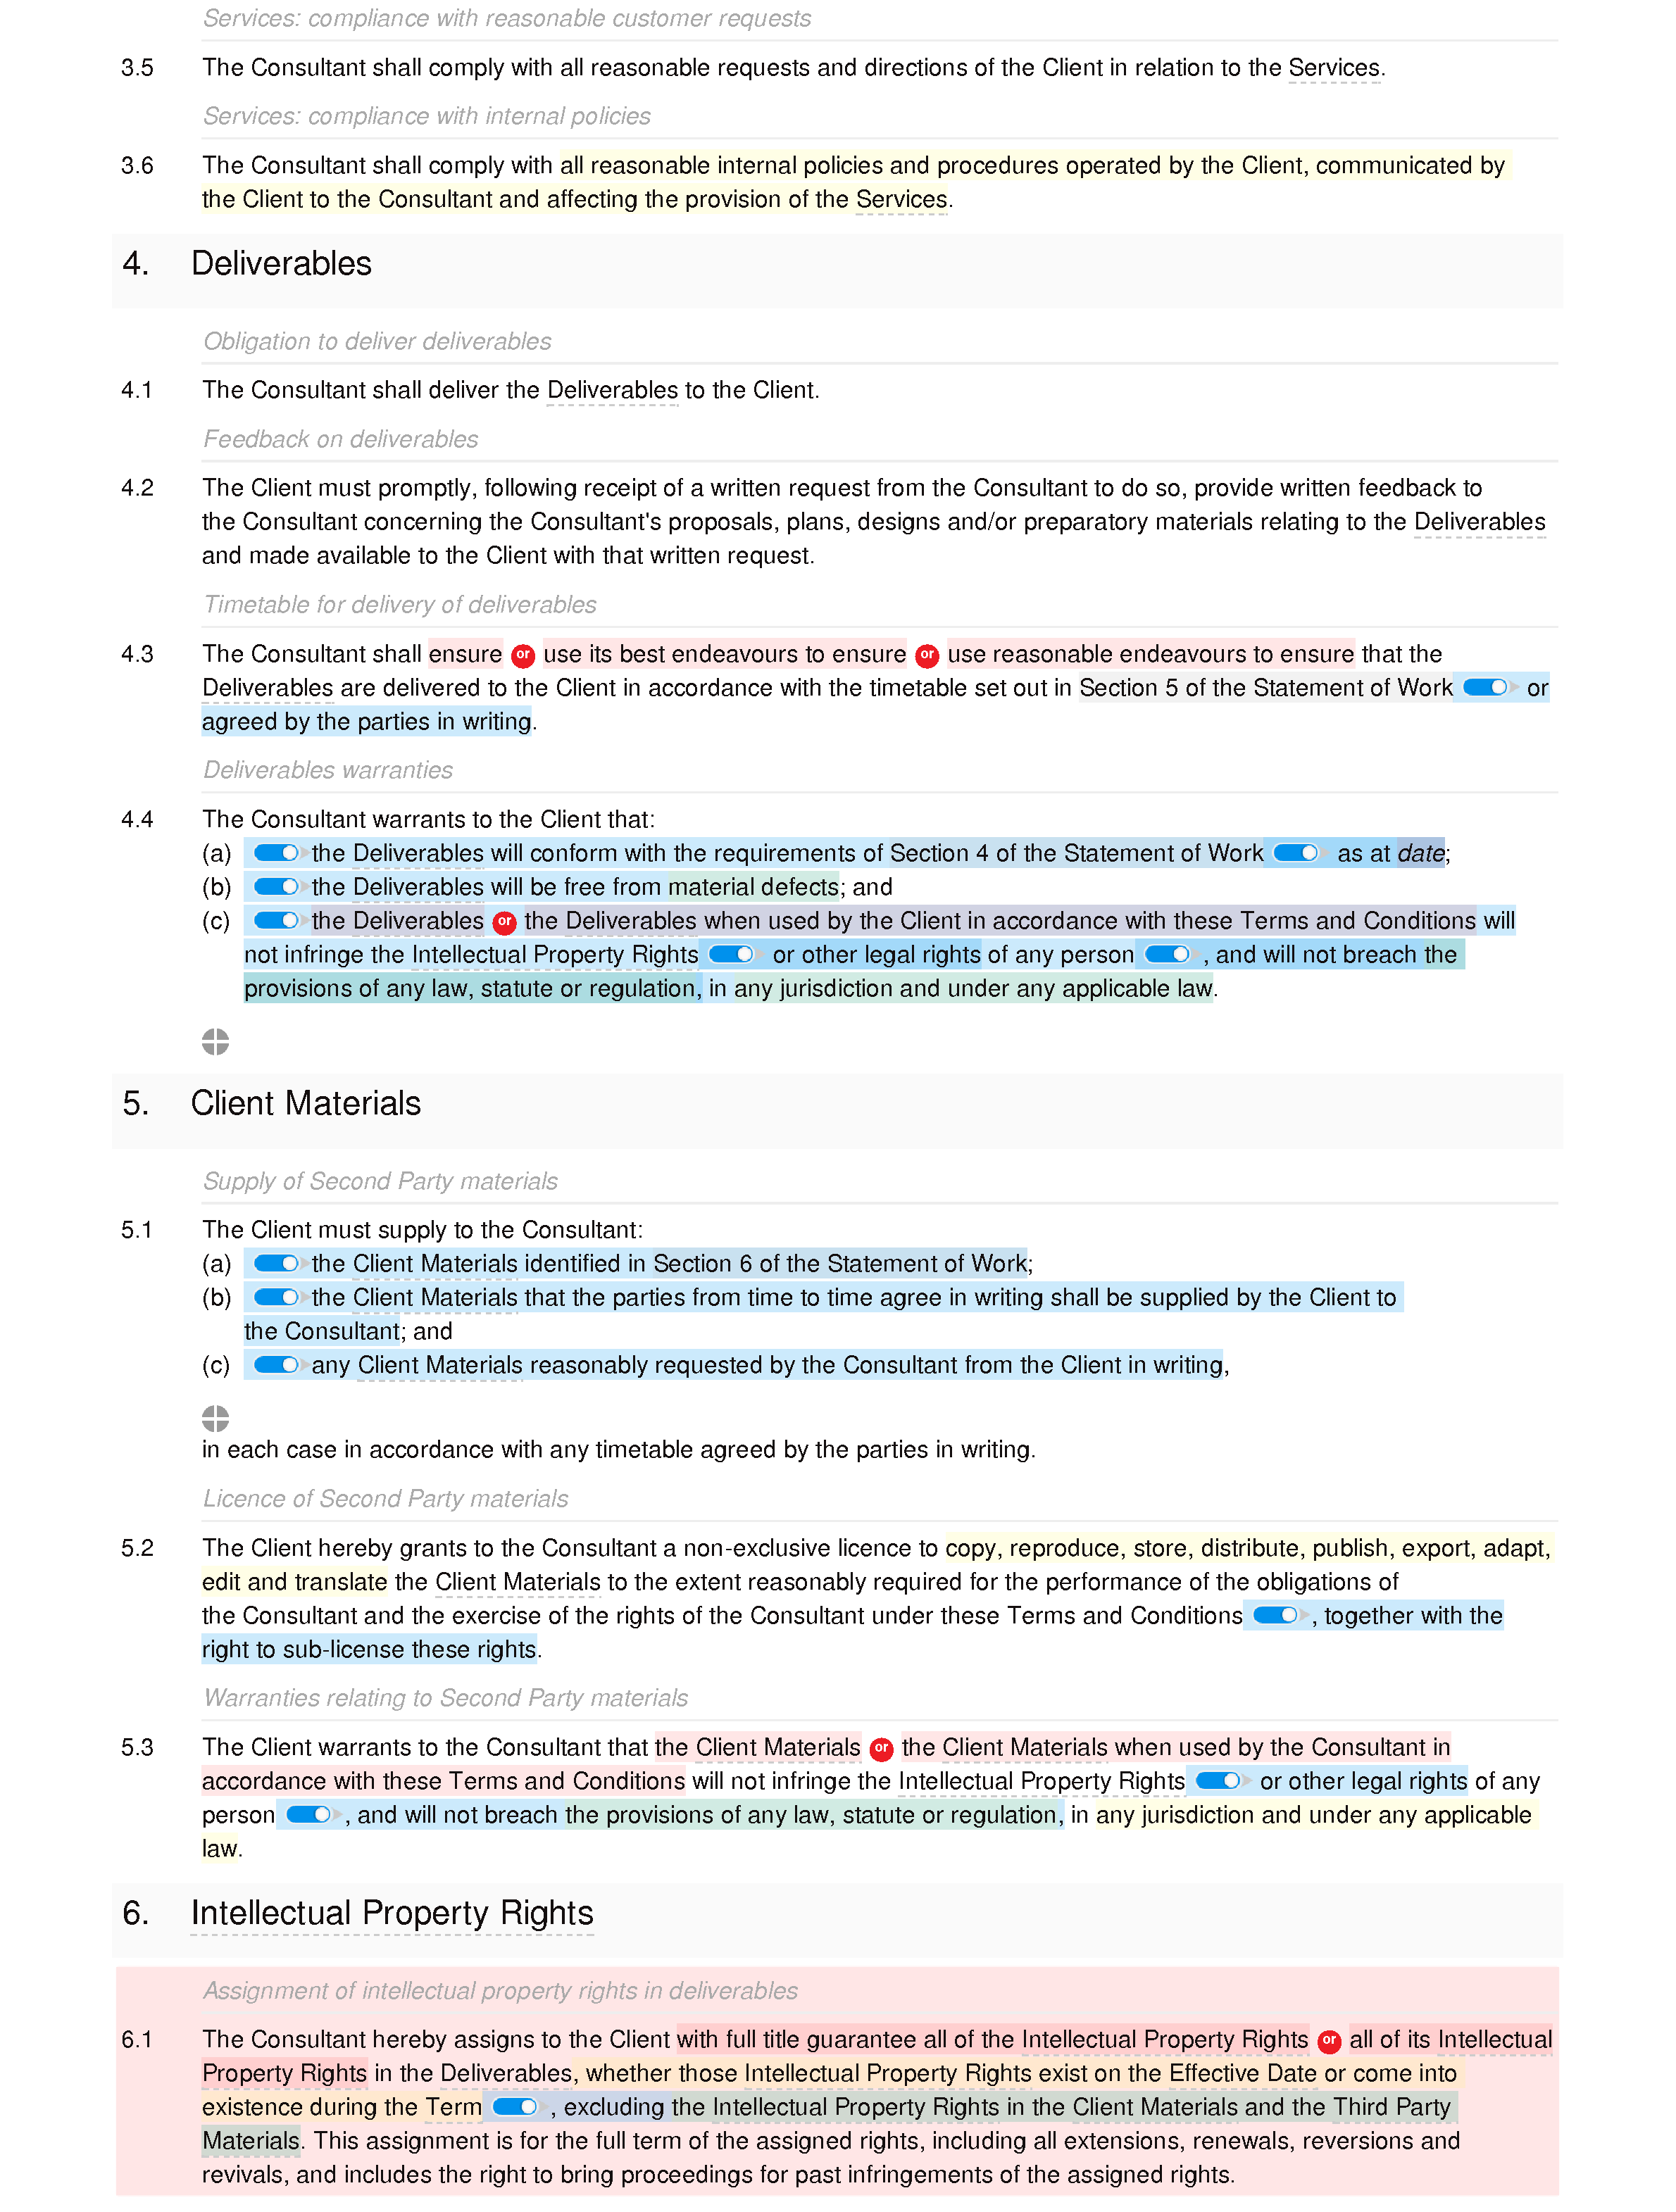 Consultancy terms and conditions (B2B and B2C) document editor preview